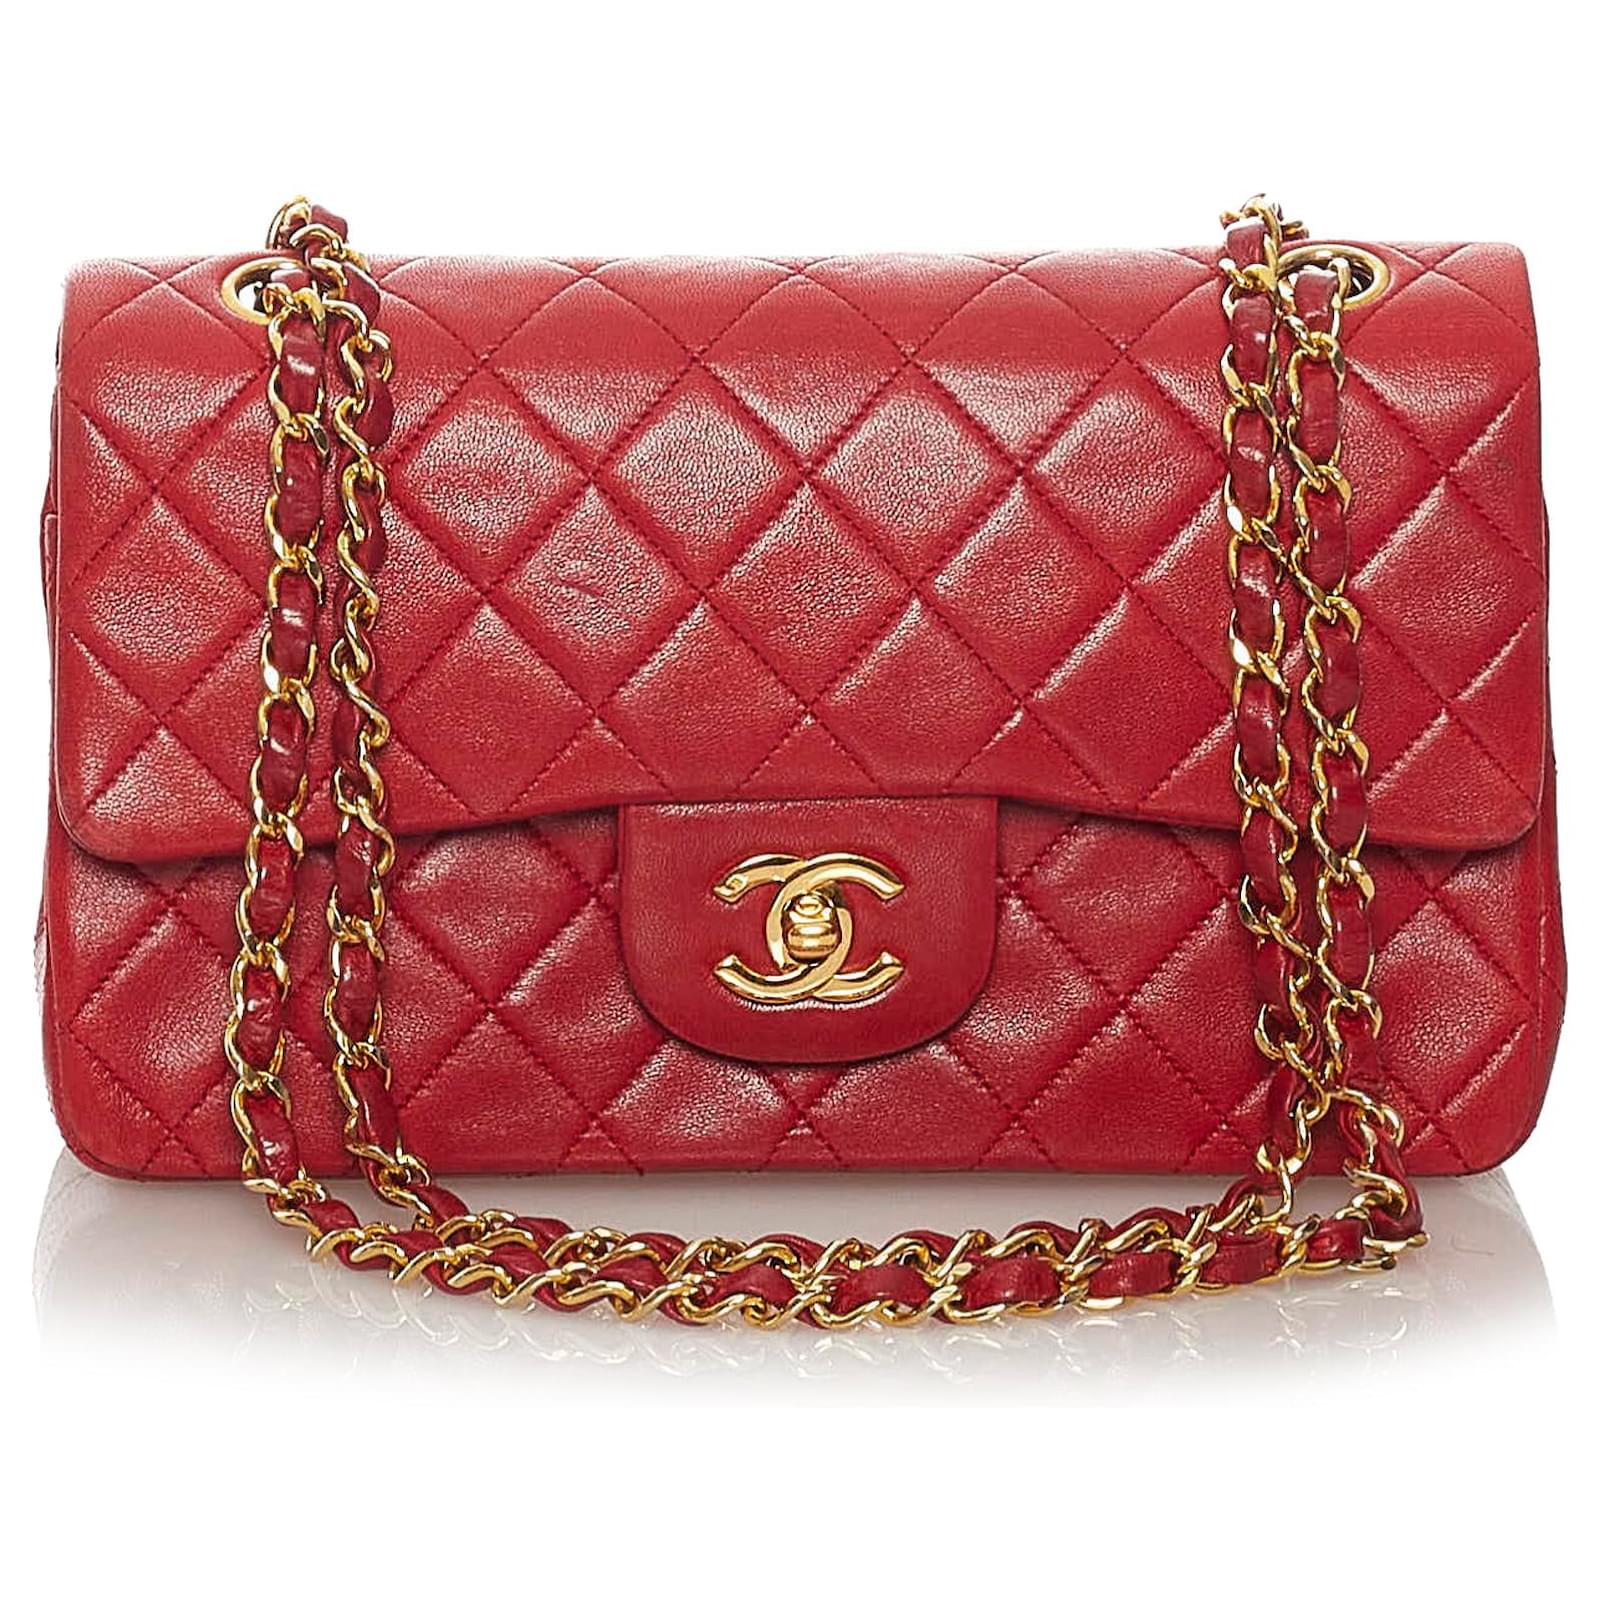 Chanel Red Classic Small Lambskin Leather Single Flap Bag